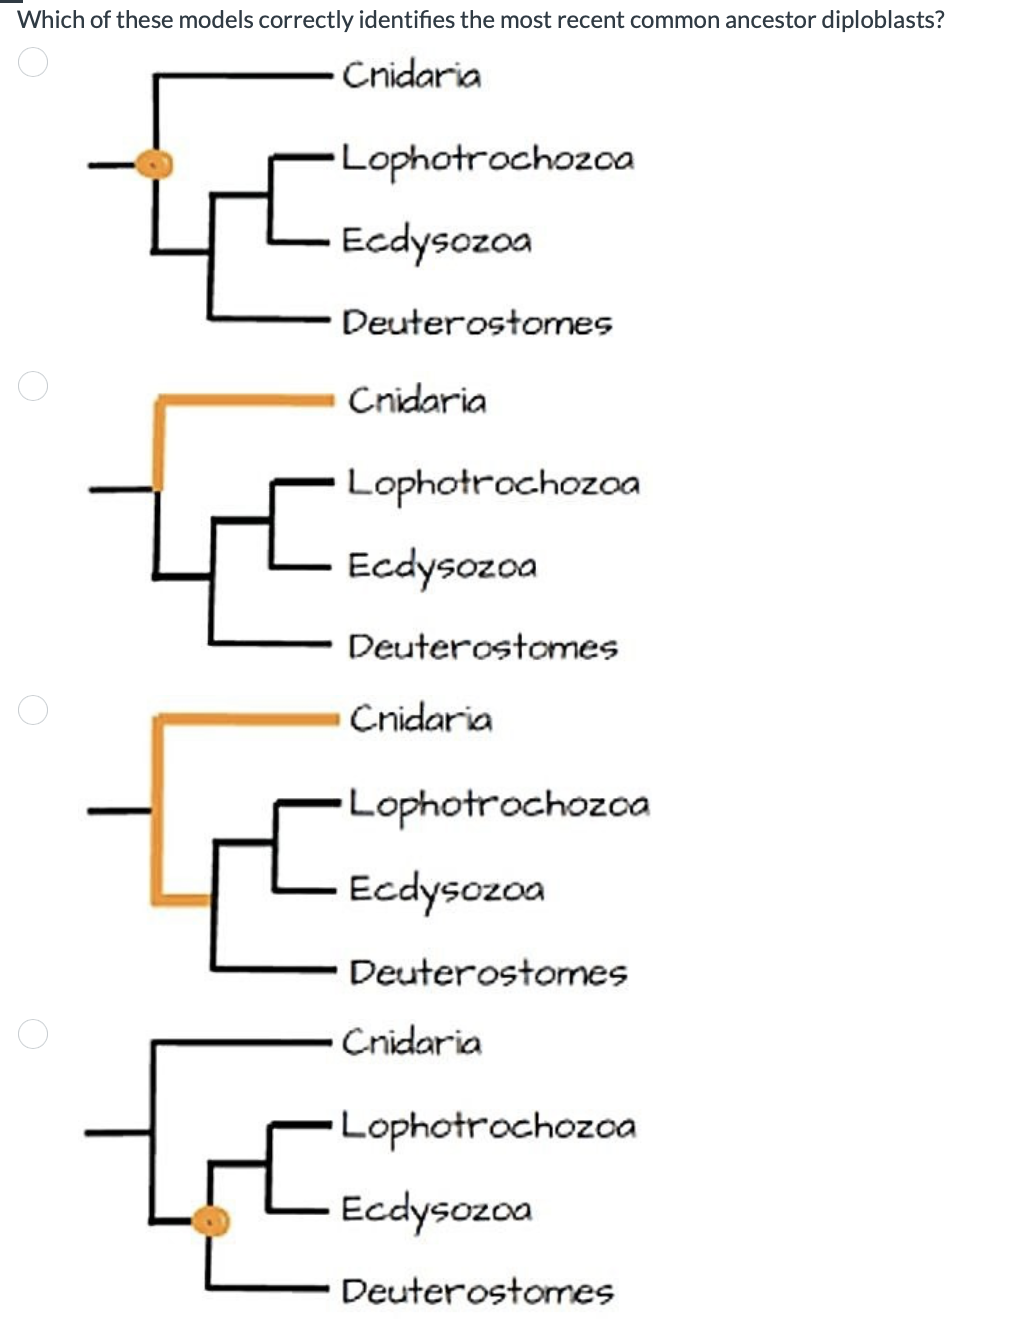 Which of these models correctly identifies the most recent common ancestor diploblasts?
Cnidaria
⚫Lophotrochozca
Ecdysozoa
Deuterostomes
Cnidaria
Lophotrochozoa
Ecdysozoa
Deuterostomes
Cnidaria
•Lophotrochozoa
Ecdysozoa
Deuterostomes
Cnidaria
Lophotrochozoa
Ecdysozoa
Deuterostomes